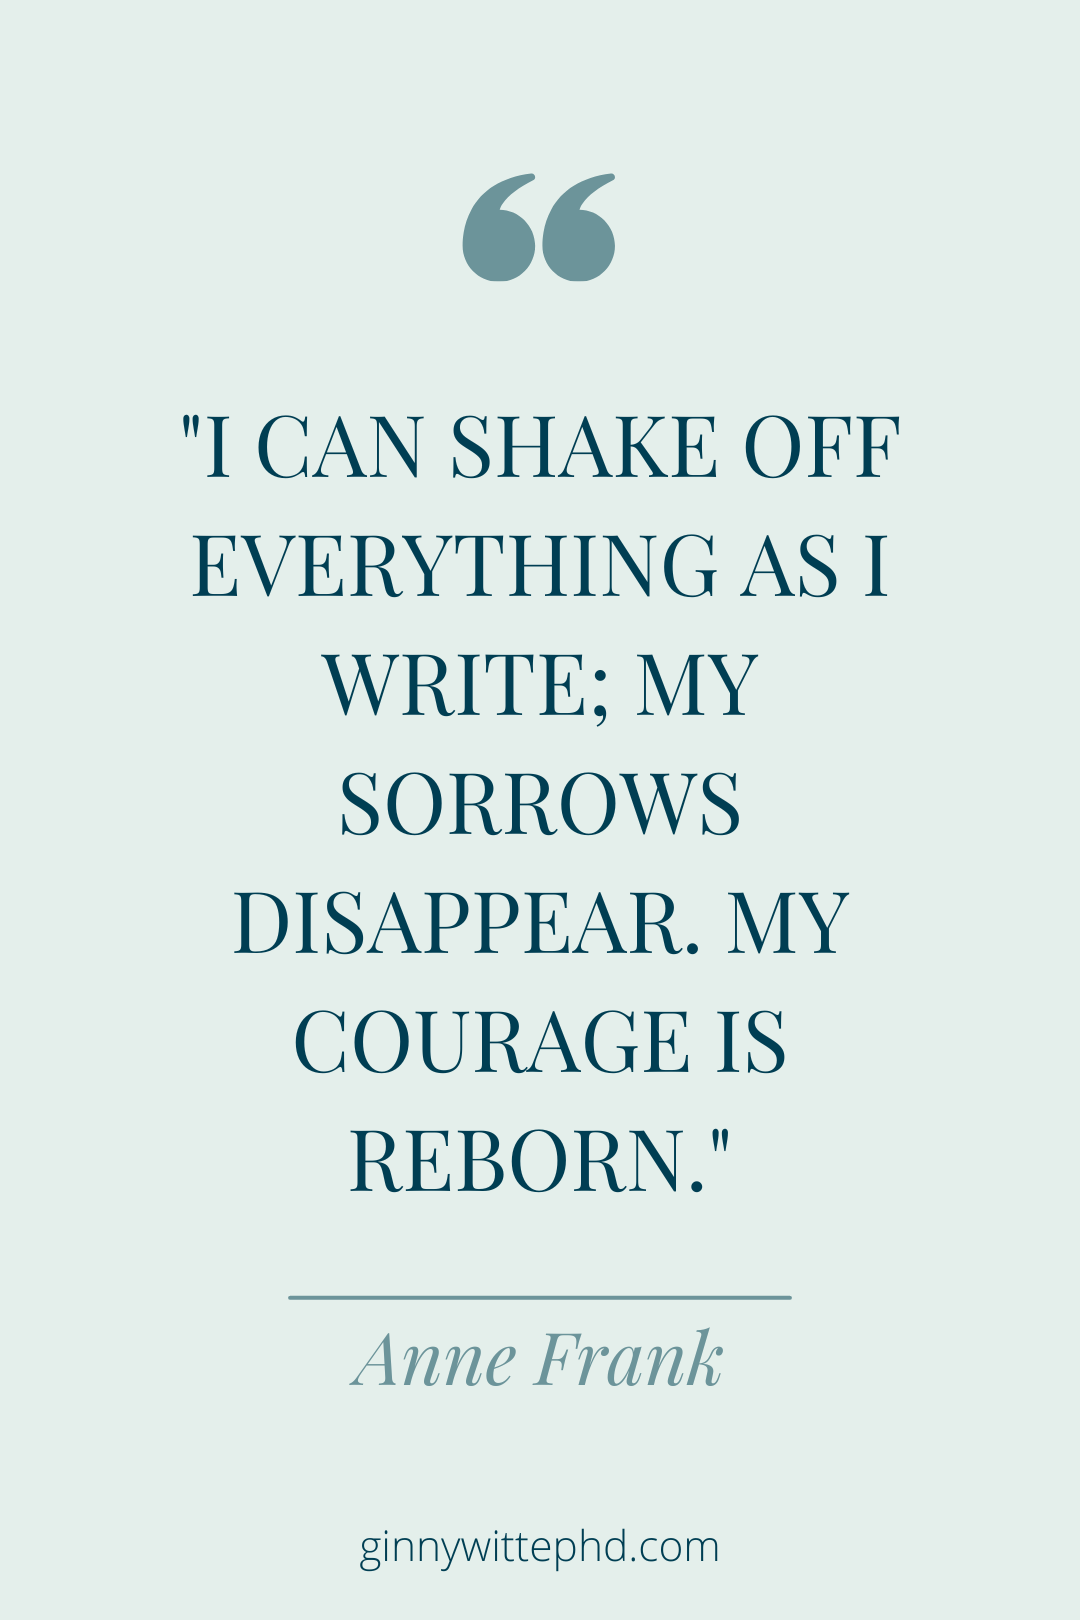 anne frank quote about how journaling helps